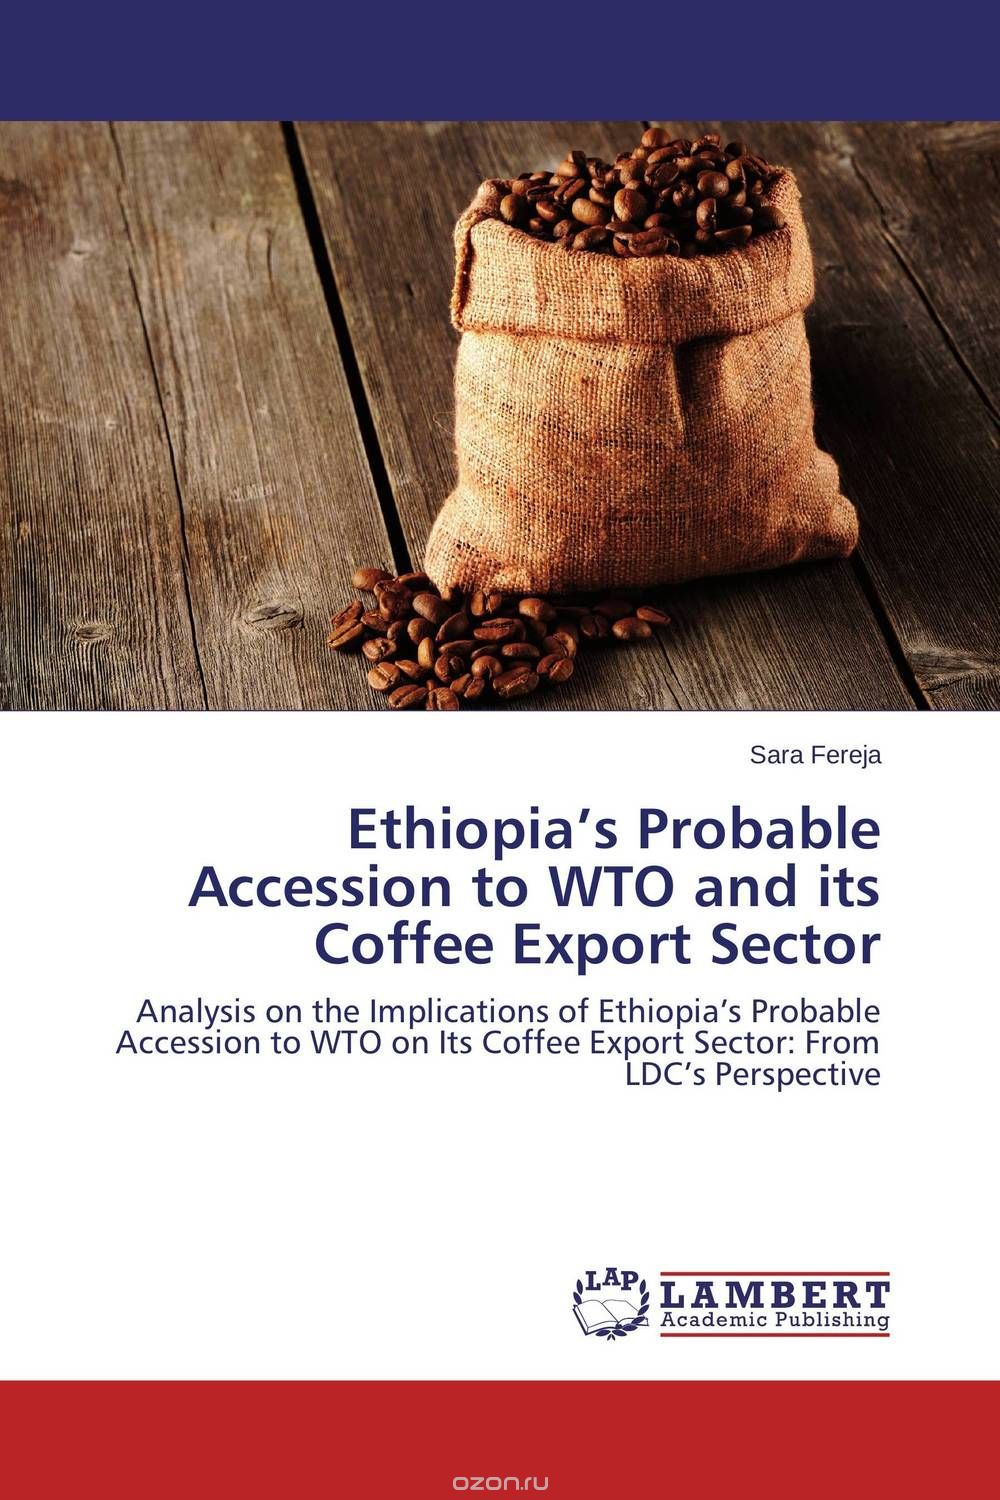 Скачать книгу "Ethiopia’s Probable Accession to WTO and its Coffee Export Sector"